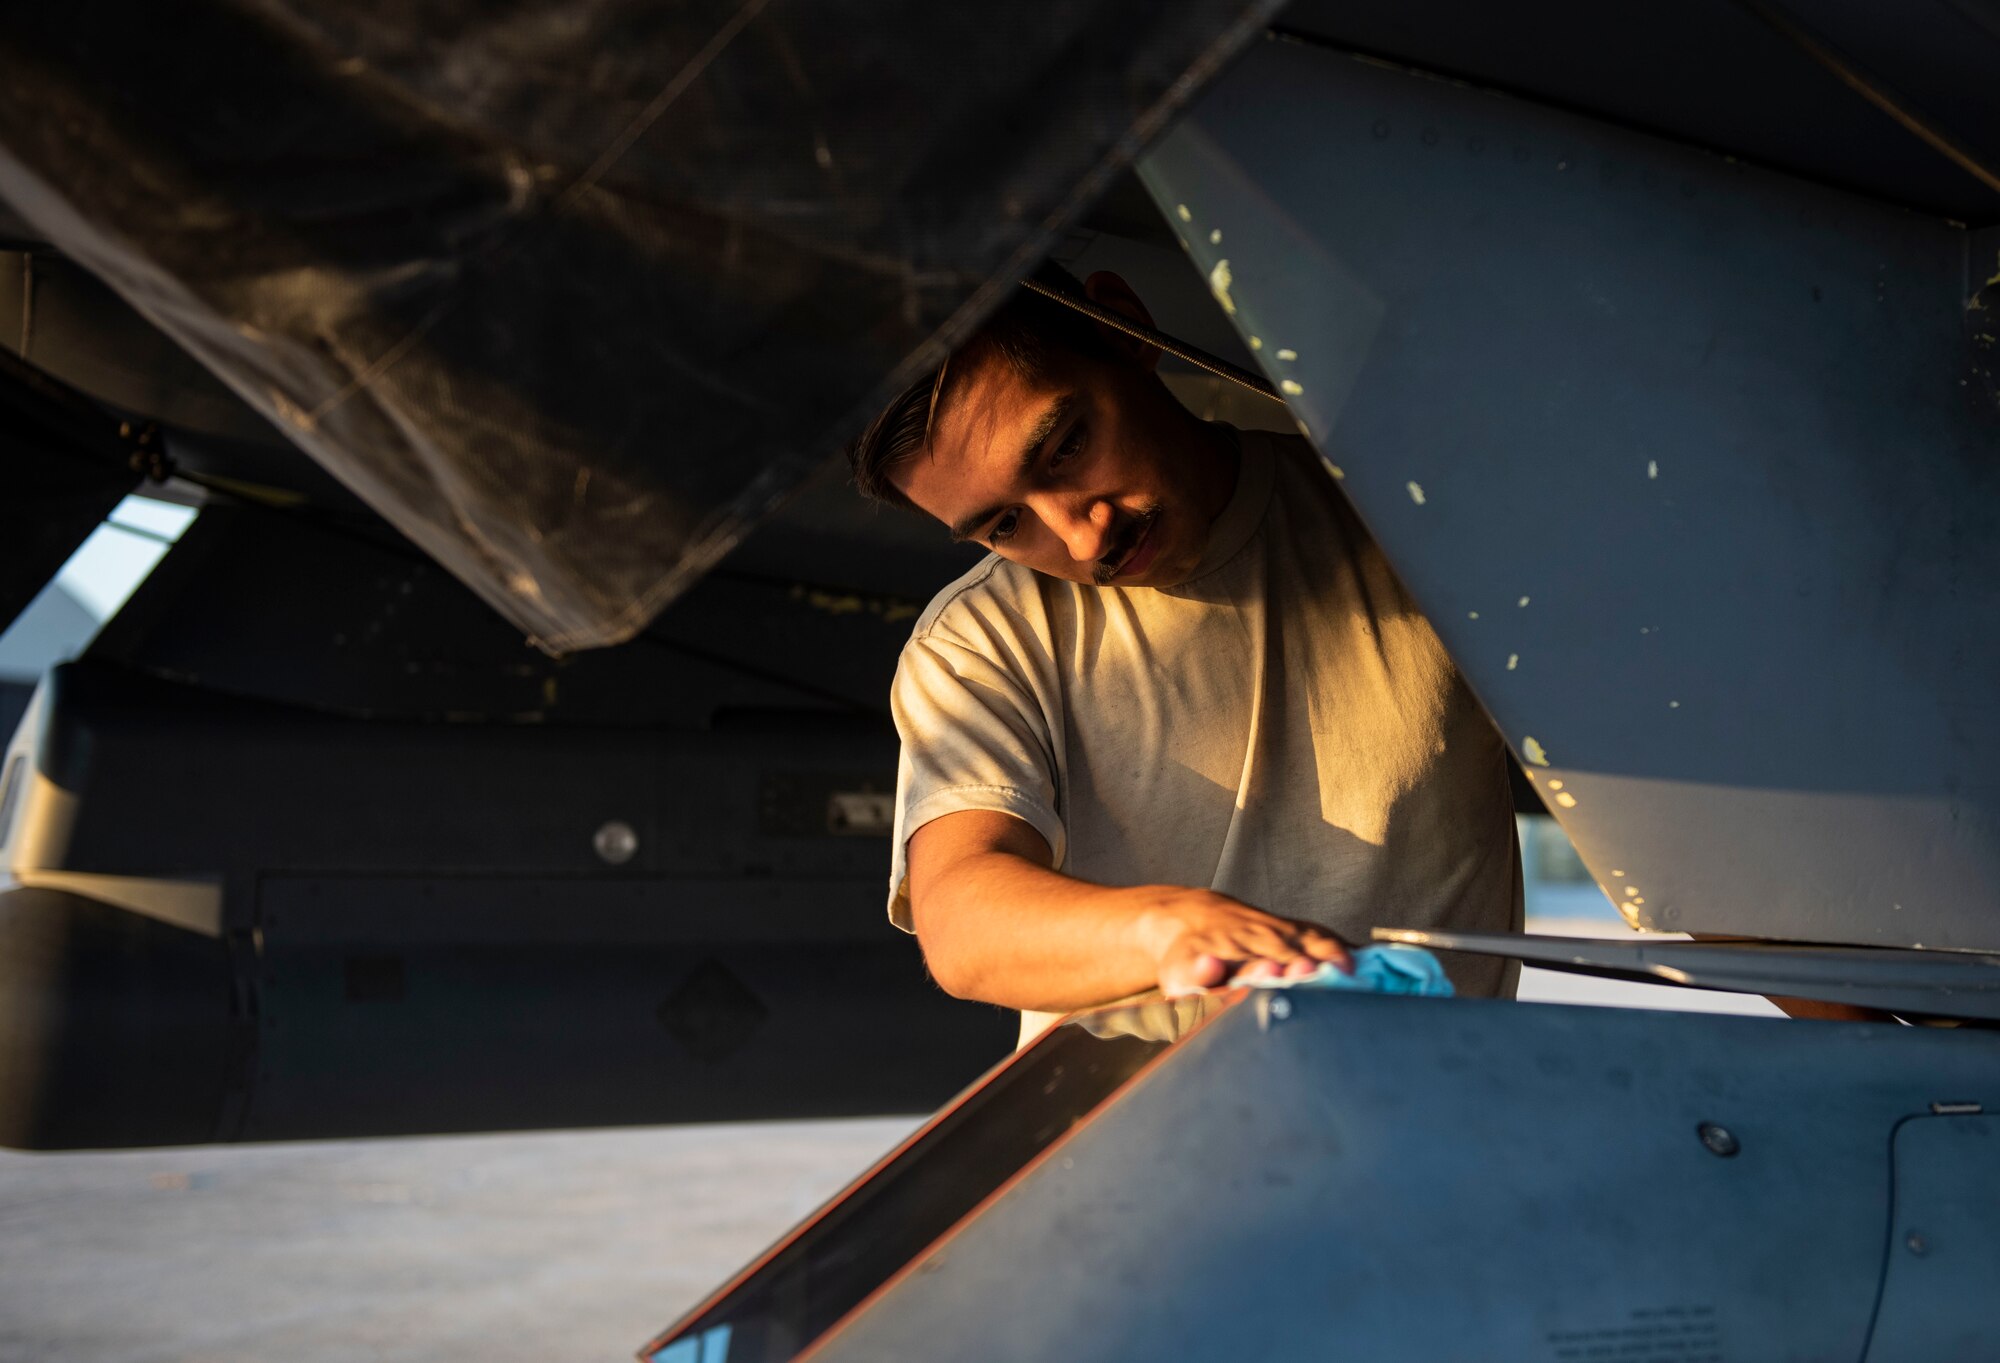 Airman 1st Class Bonifacio Garcia, 757th Aircraft Maintenance Squadron tactical aircraft maintainer, cleans an F-15E Strike Eagle fighter jet during Combat Archer 19-12 on Tyndall Air Force Base, Fla., Sept. 24, 2019. Combat Archer is the Department of Defense’s largest air-to-air live fire missile employment exercise. (U.S. Air Force photo by Airman 1st Class Bailee A. Darbasie)